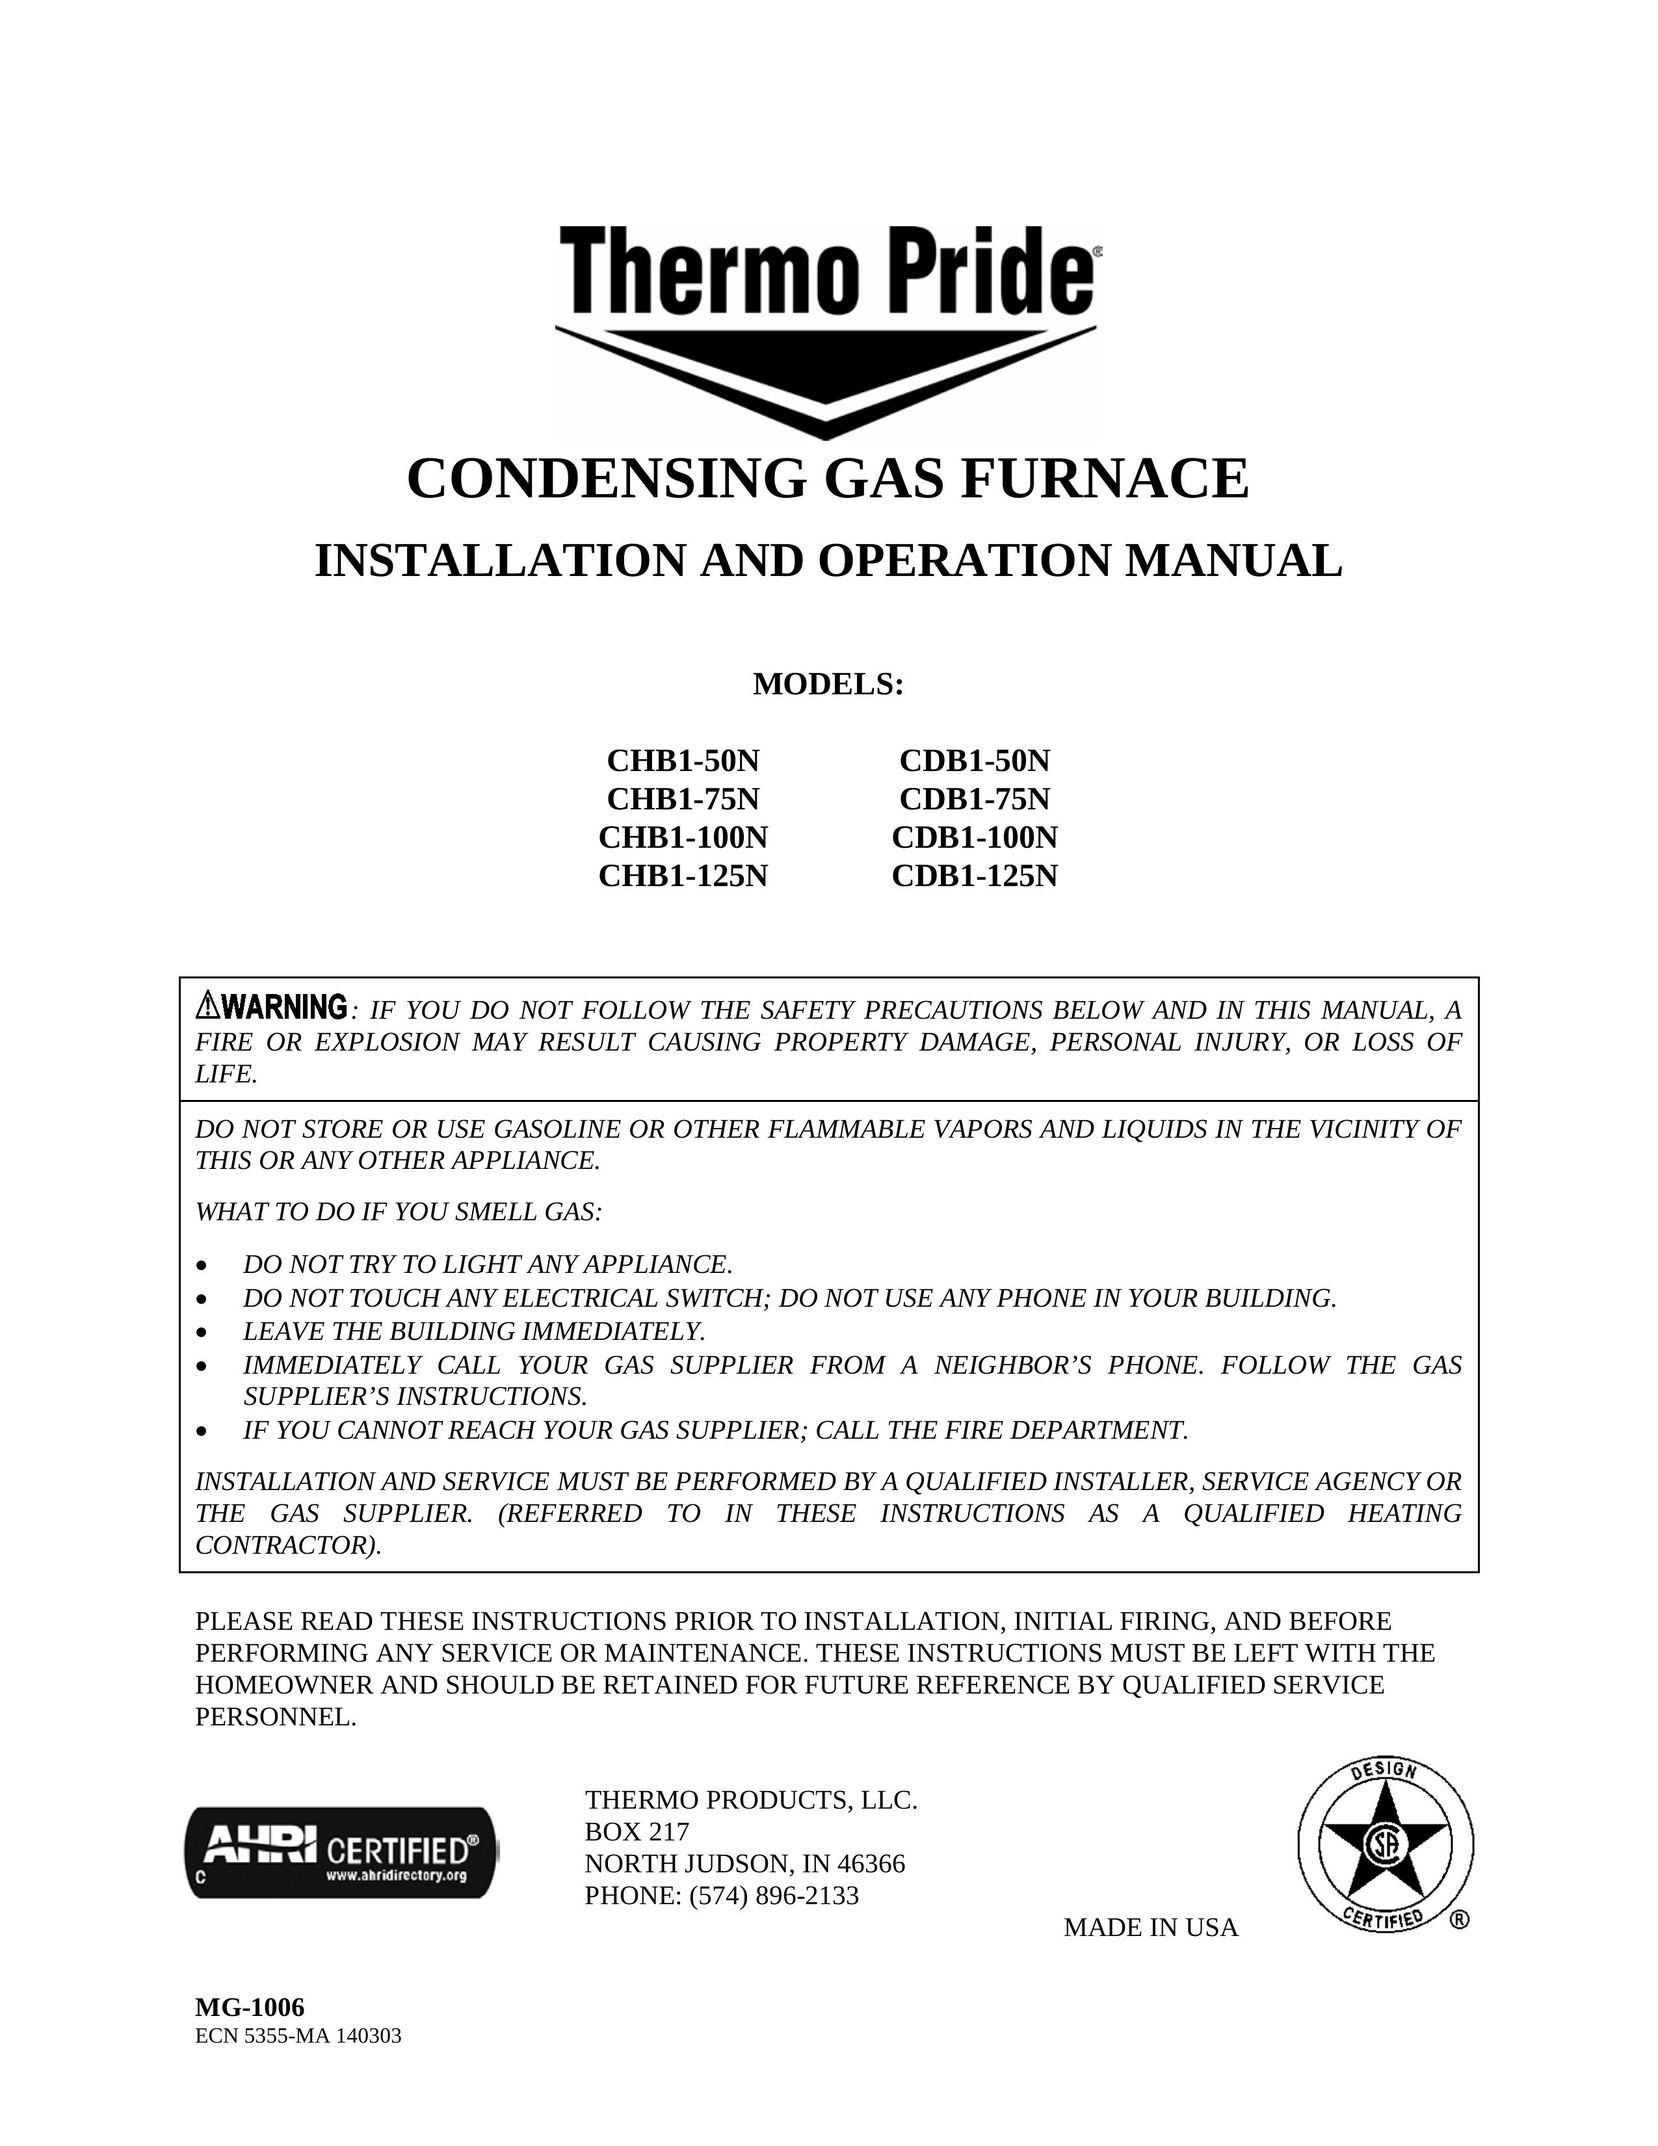 Thermo Products CBD1-75N Furnace User Manual